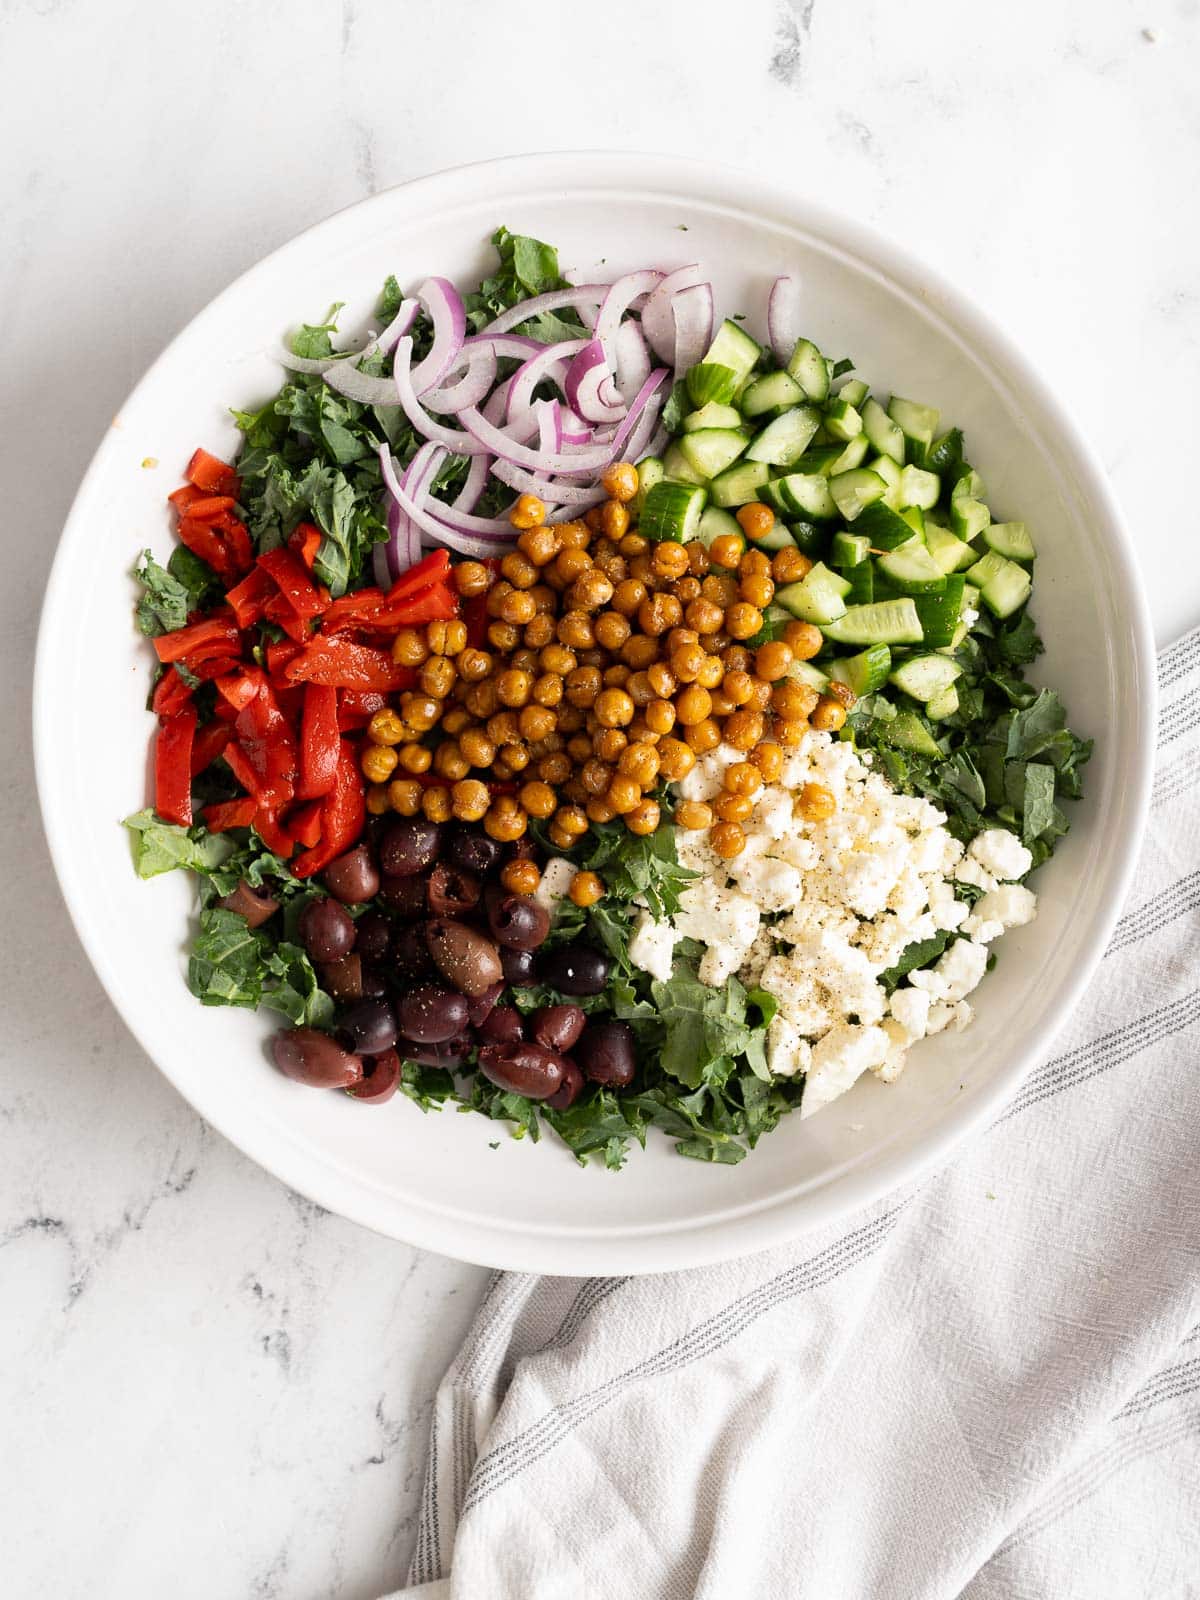 Chickpea salad ingredients in a bowl.